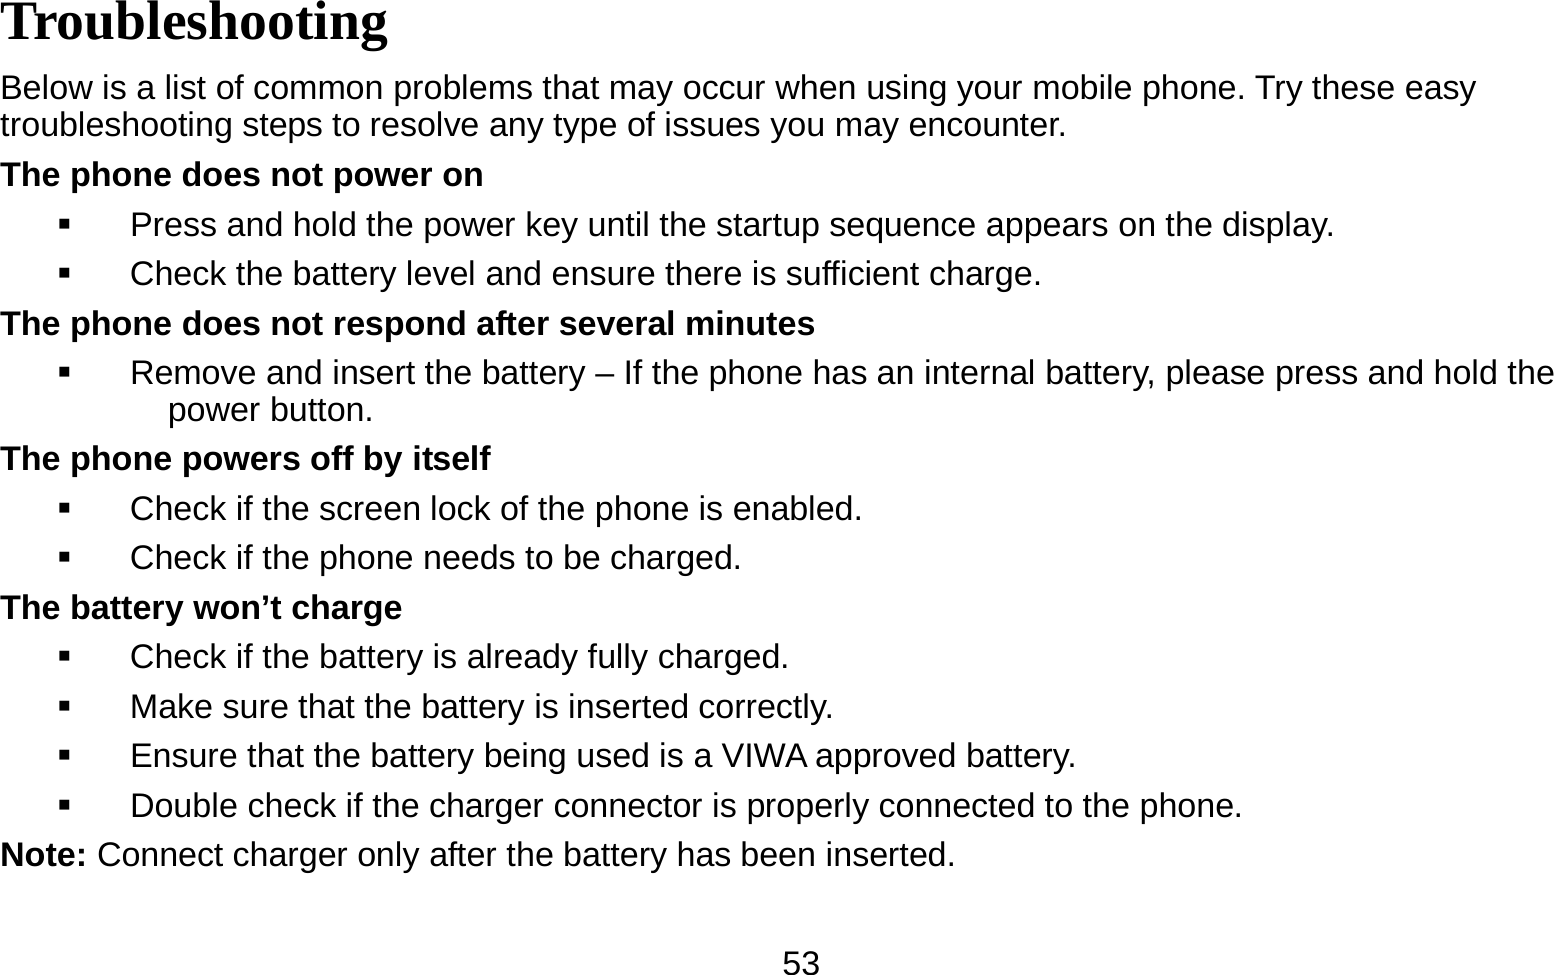   53Troubleshooting Below is a list of common problems that may occur when using your mobile phone. Try these easy troubleshooting steps to resolve any type of issues you may encounter.   The phone does not power on   Press and hold the power key until the startup sequence appears on the display.   Check the battery level and ensure there is sufficient charge. The phone does not respond after several minutes   Remove and insert the battery – If the phone has an internal battery, please press and hold the power button. The phone powers off by itself   Check if the screen lock of the phone is enabled.   Check if the phone needs to be charged. The battery won’t charge   Check if the battery is already fully charged.   Make sure that the battery is inserted correctly.     Ensure that the battery being used is a VIWA approved battery.   Double check if the charger connector is properly connected to the phone. Note: Connect charger only after the battery has been inserted.  